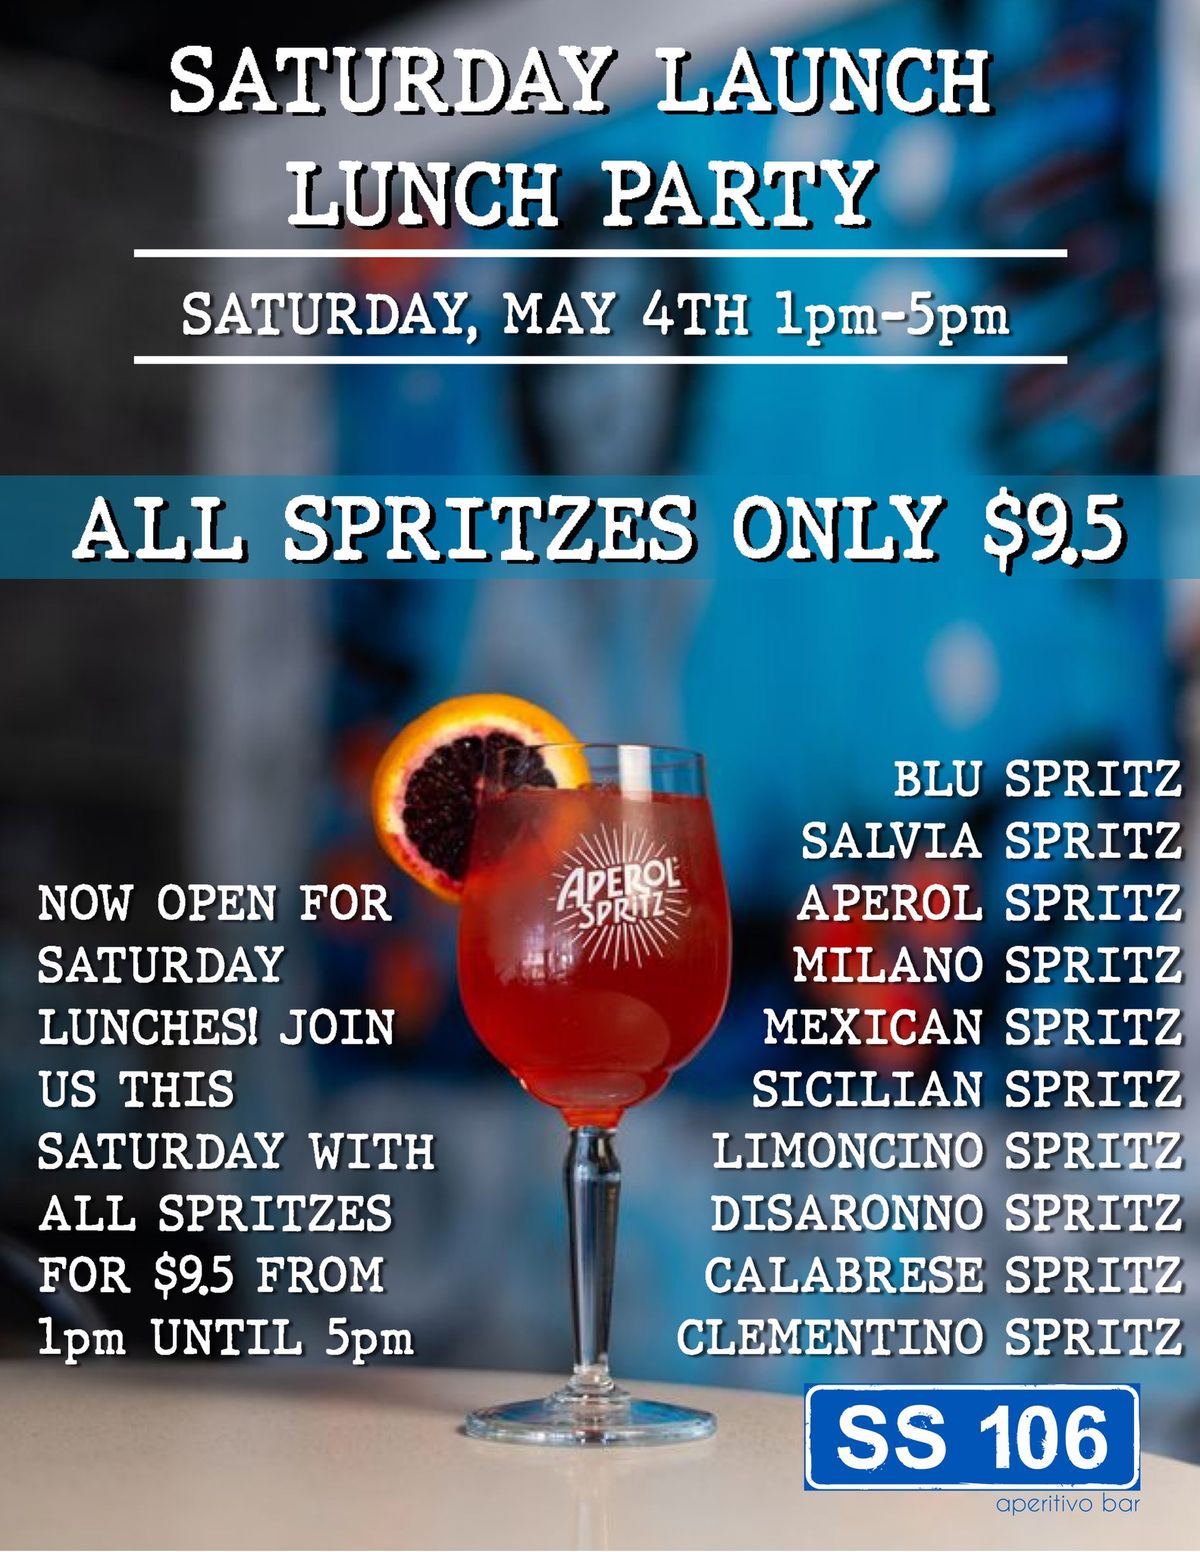 Saturday Lunch Launch Party: Saturdays are for Spritzes